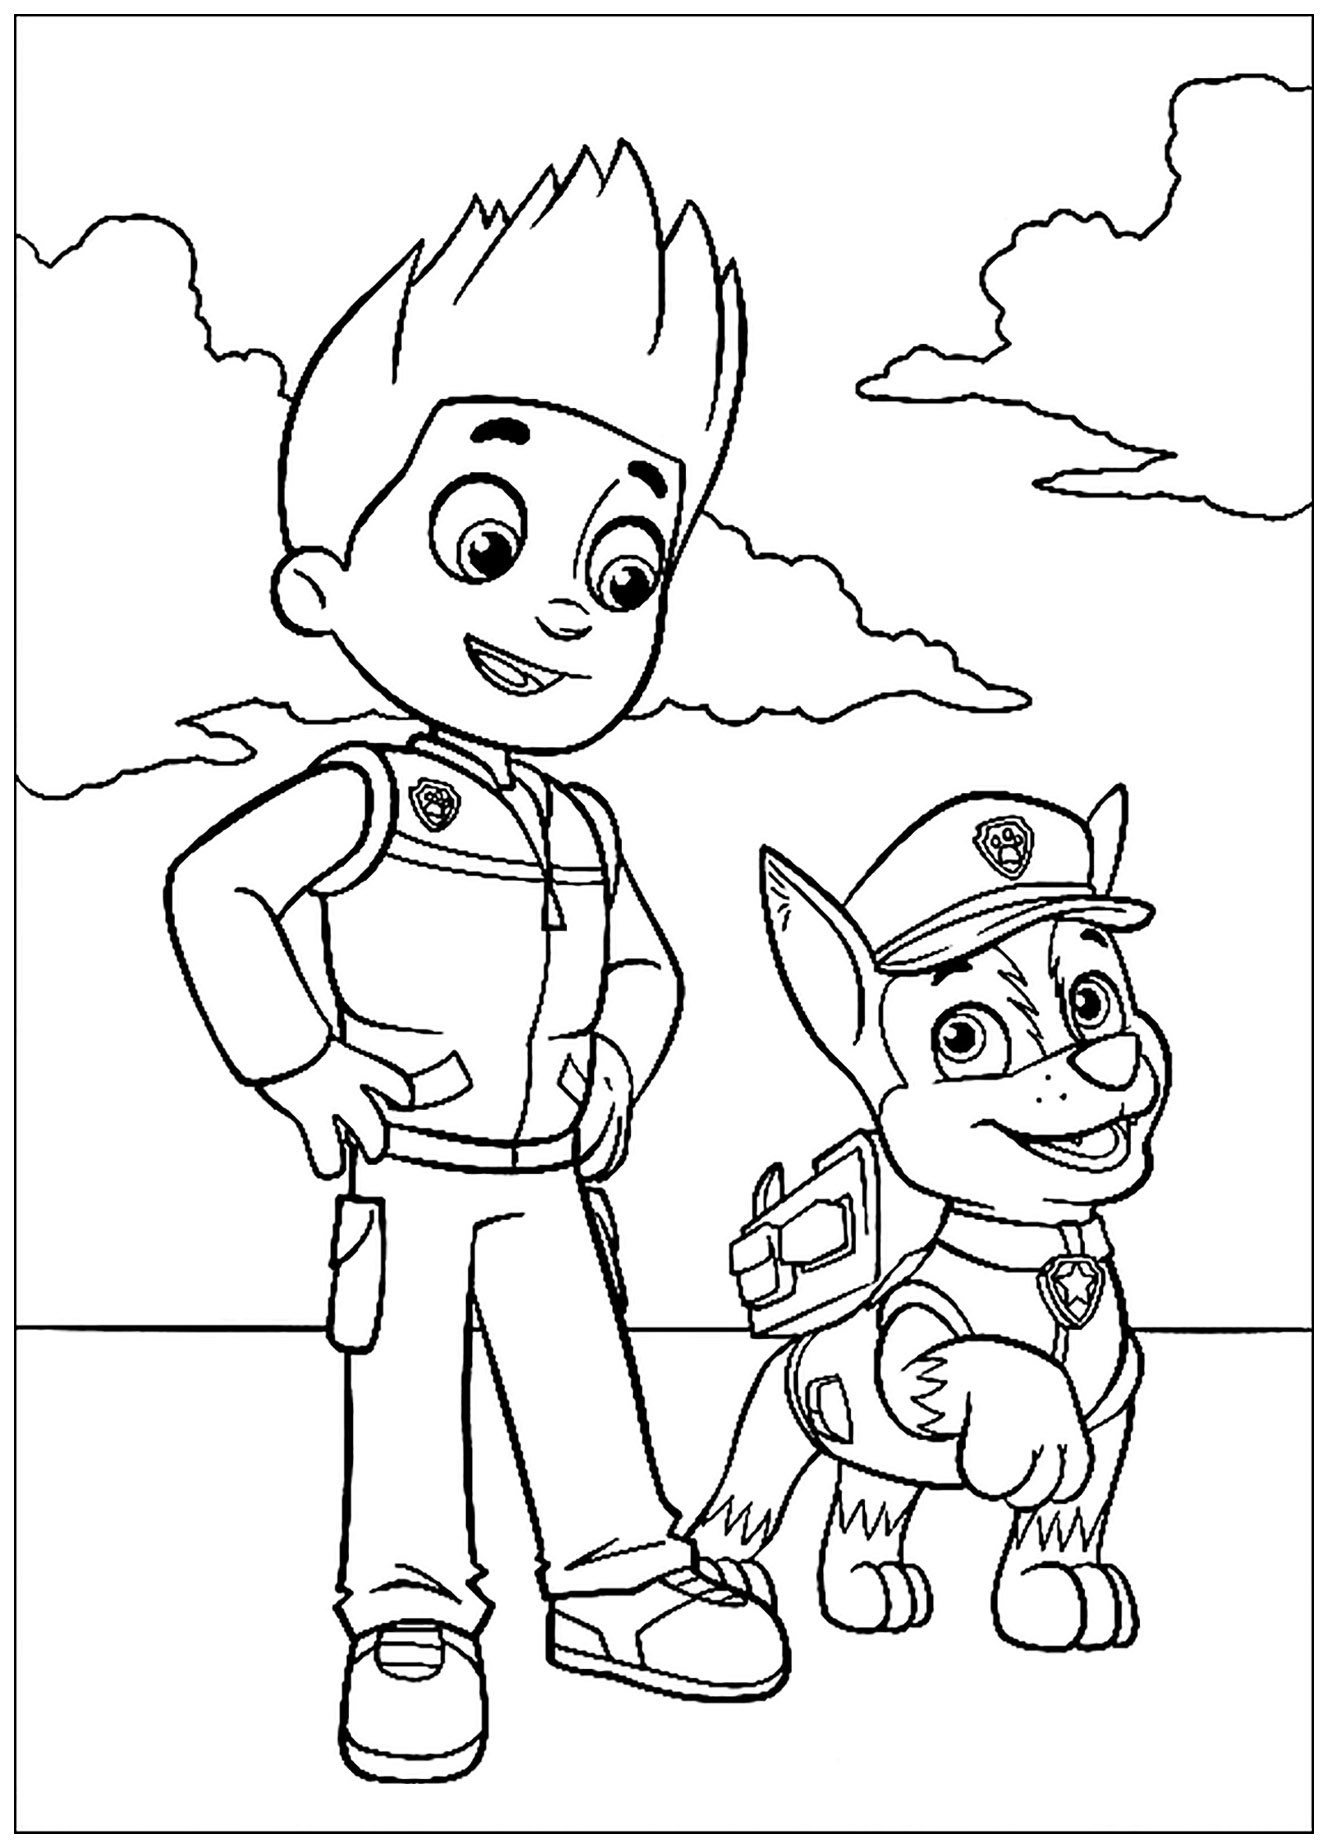 Paw Patrol Coloring Pages FREE Printable 155